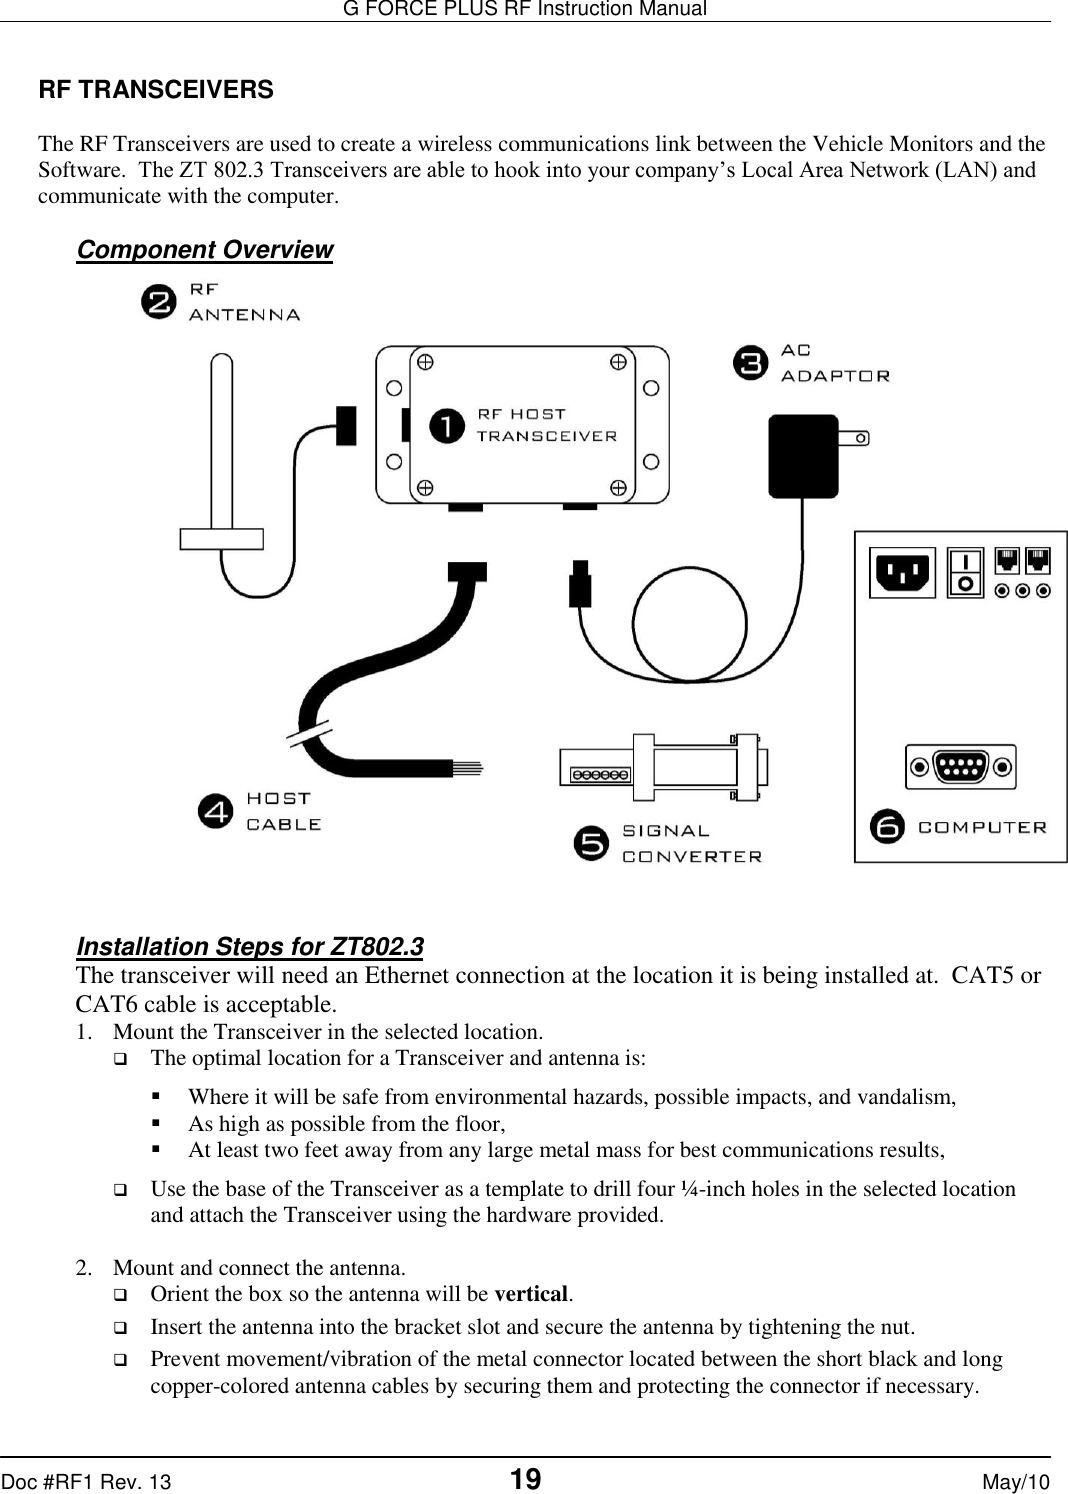 G FORCE PLUS RF Instruction Manual   Doc #RF1 Rev. 13  19 May/10  RF TRANSCEIVERS  The RF Transceivers are used to create a wireless communications link between the Vehicle Monitors and the Software.  The ZT 802.3 Transceivers are able to hook into your company’s Local Area Network (LAN) and communicate with the computer.  Component Overview     Installation Steps for ZT802.3 The transceiver will need an Ethernet connection at the location it is being installed at.  CAT5 or CAT6 cable is acceptable. 1. Mount the Transceiver in the selected location.  The optimal location for a Transceiver and antenna is:  Where it will be safe from environmental hazards, possible impacts, and vandalism,  As high as possible from the floor,   At least two feet away from any large metal mass for best communications results,  Use the base of the Transceiver as a template to drill four ¼-inch holes in the selected location and attach the Transceiver using the hardware provided.  2. Mount and connect the antenna.  Orient the box so the antenna will be vertical.  Insert the antenna into the bracket slot and secure the antenna by tightening the nut.  Prevent movement/vibration of the metal connector located between the short black and long copper-colored antenna cables by securing them and protecting the connector if necessary.  